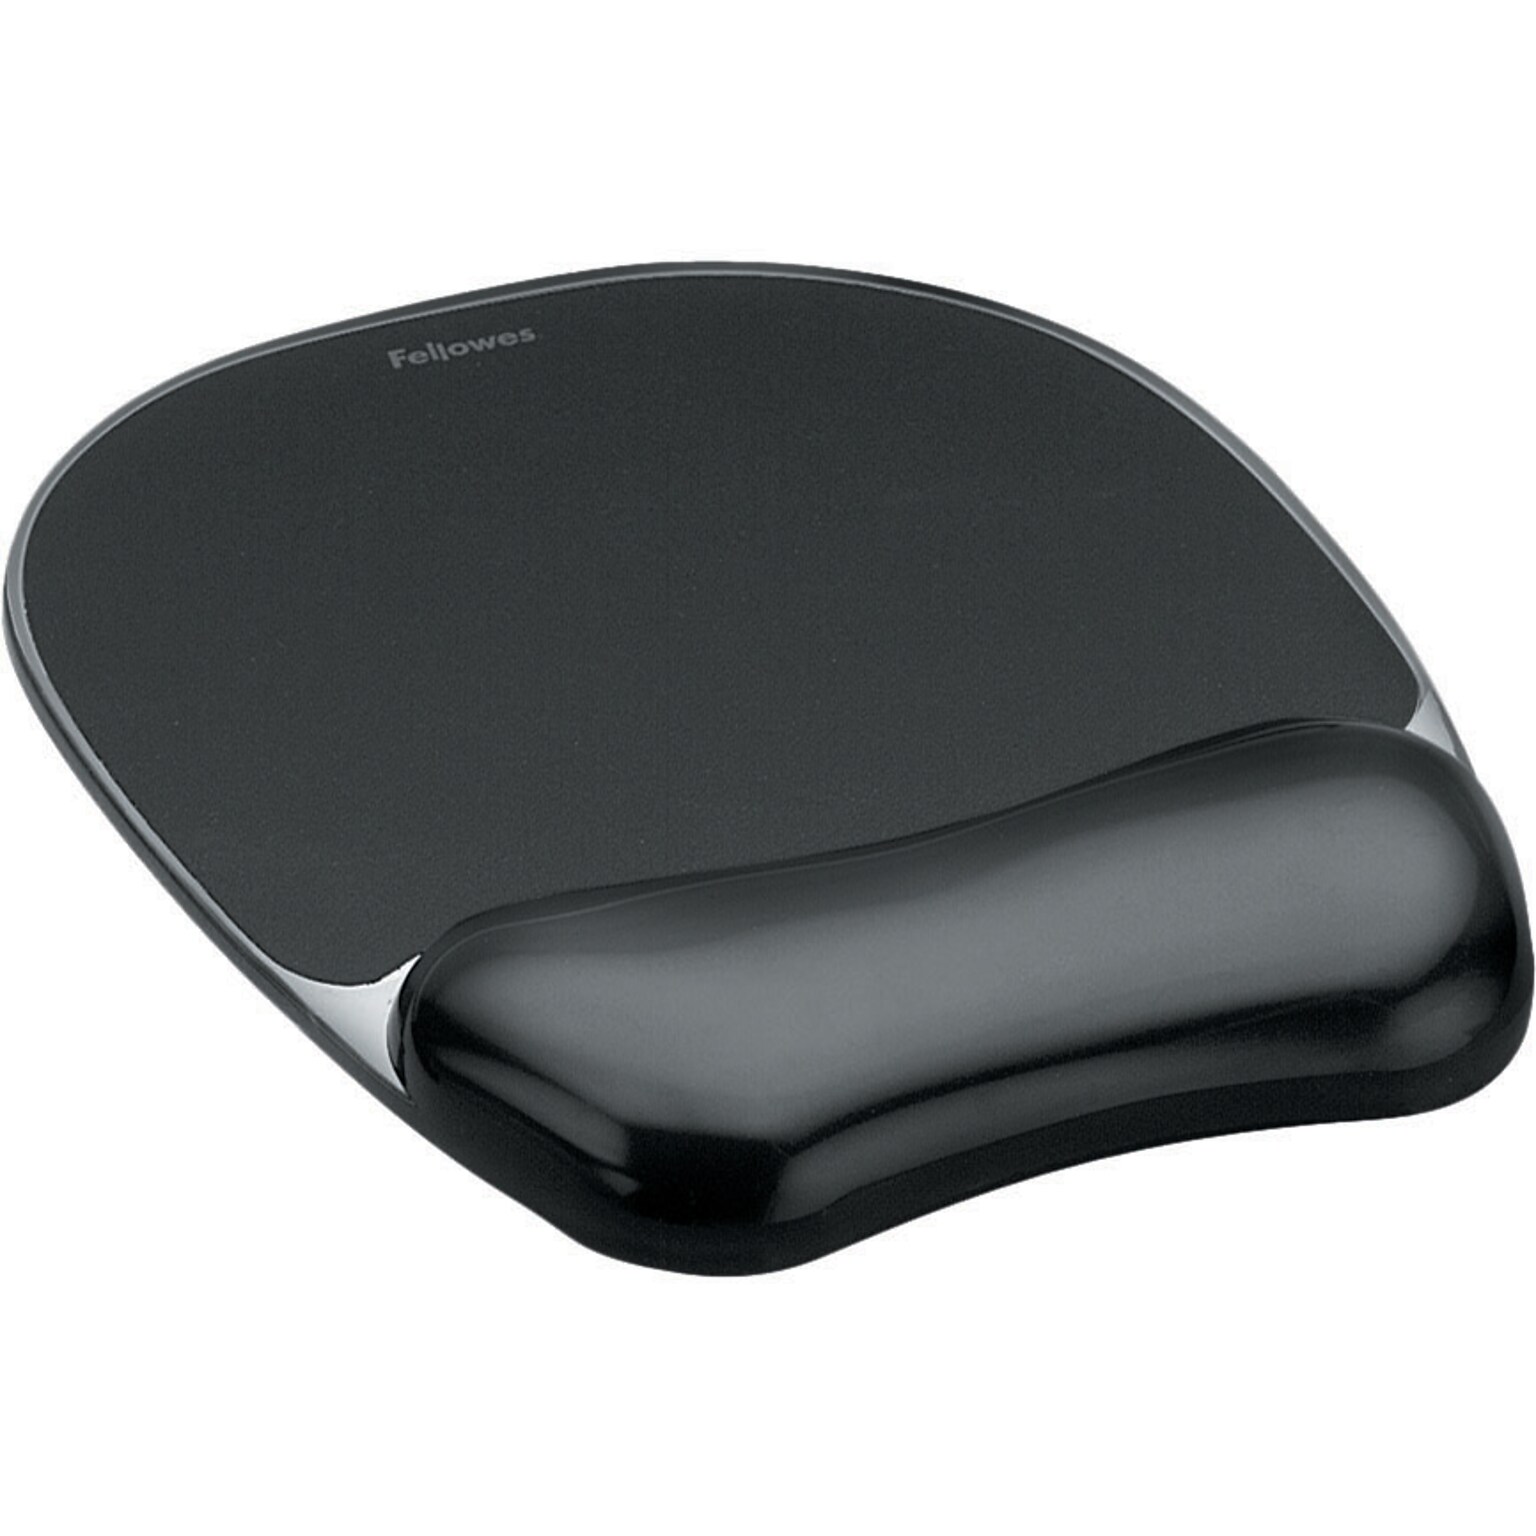 Fellowes Crystal Gel Mouse Padwrist Rest Combo Non Skid Base Black